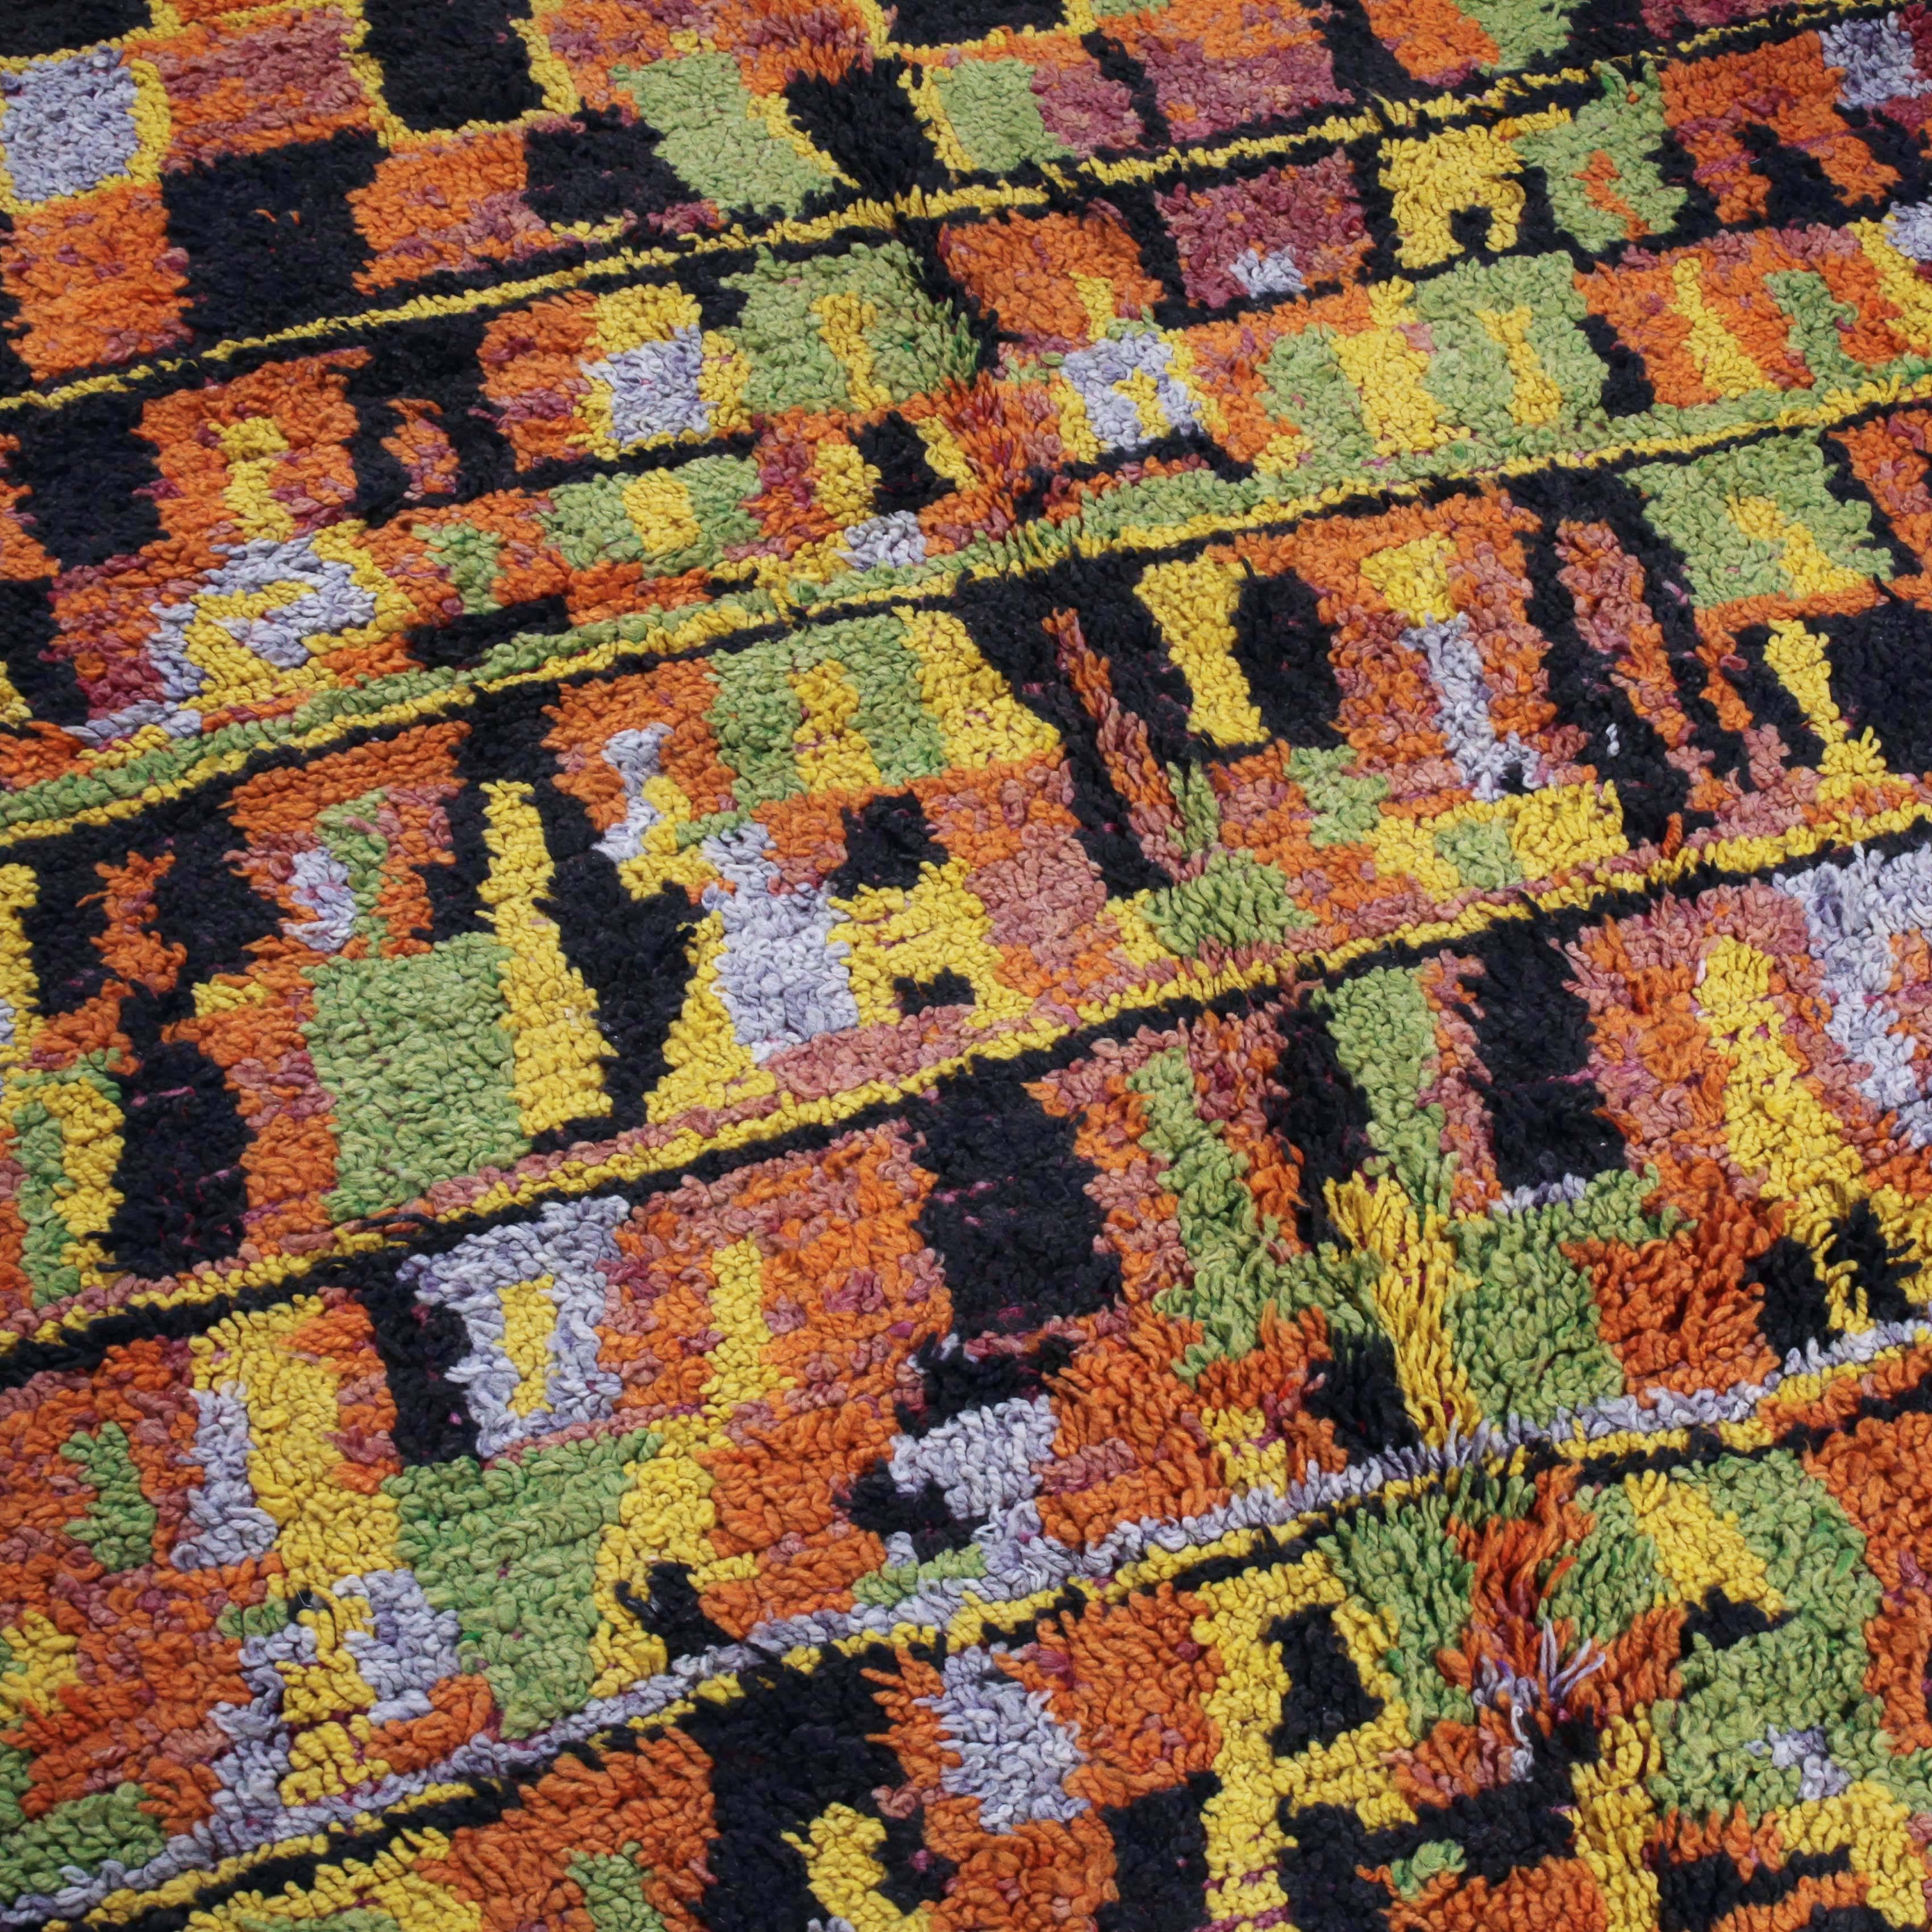 An extraordinary hand-knotted woollen carpet from the Aït Bou Ichaouen tribe.

This seductive pattern and brazen color combination resonates far beyond the weavings of traditional Berber arts and is on par with abstract color field painting and